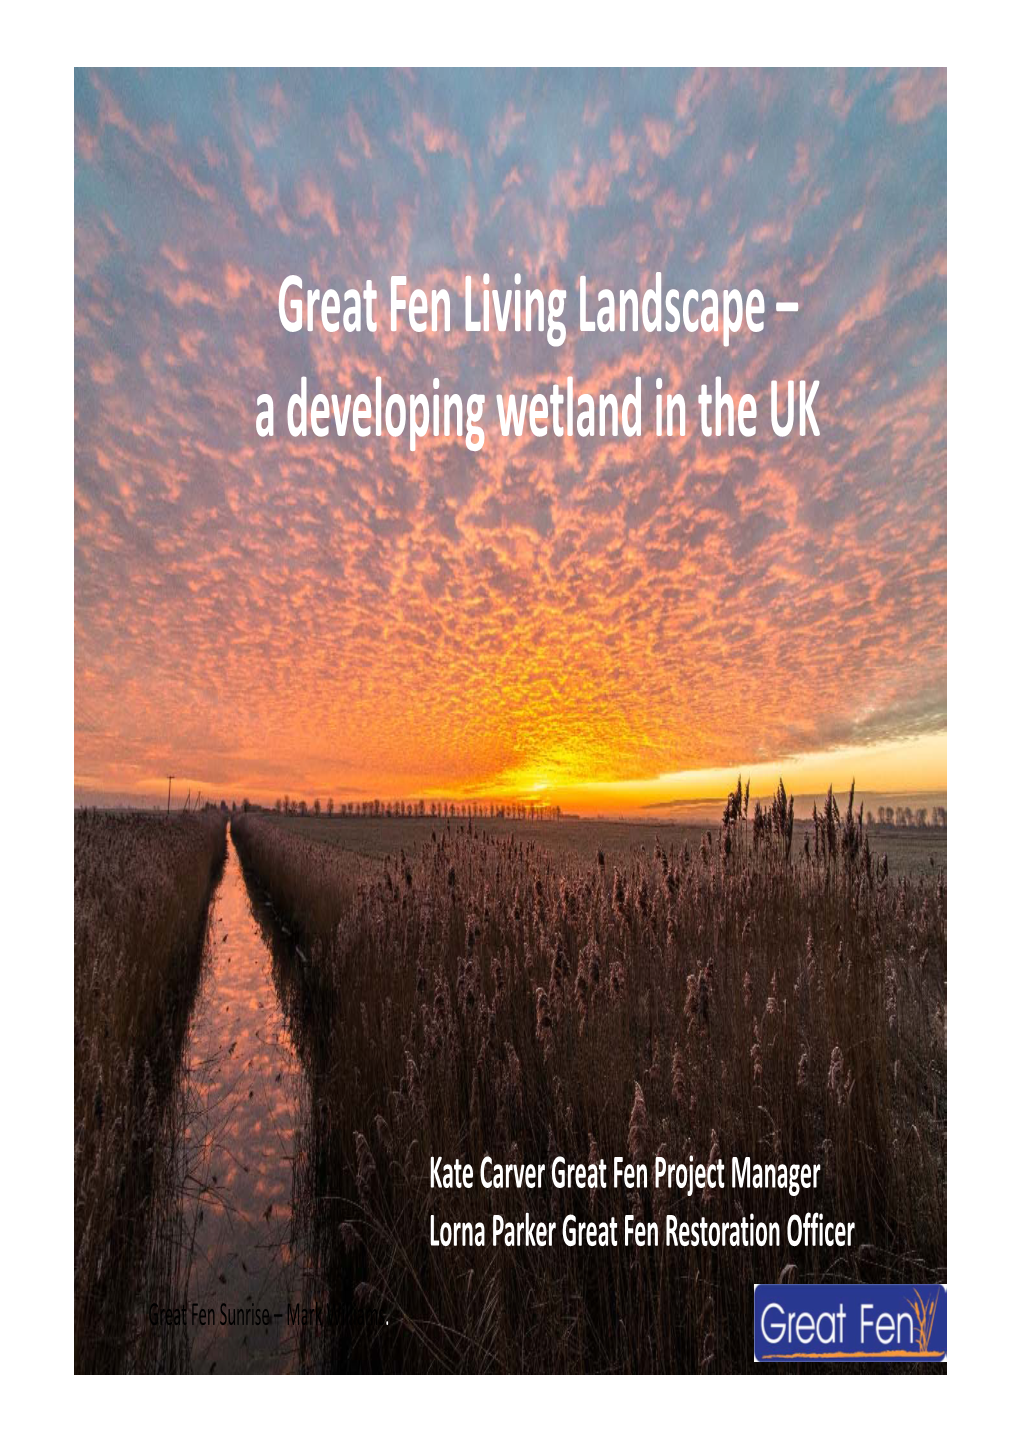 Great Fen Living Landscape – a Developing Wetland in the UK